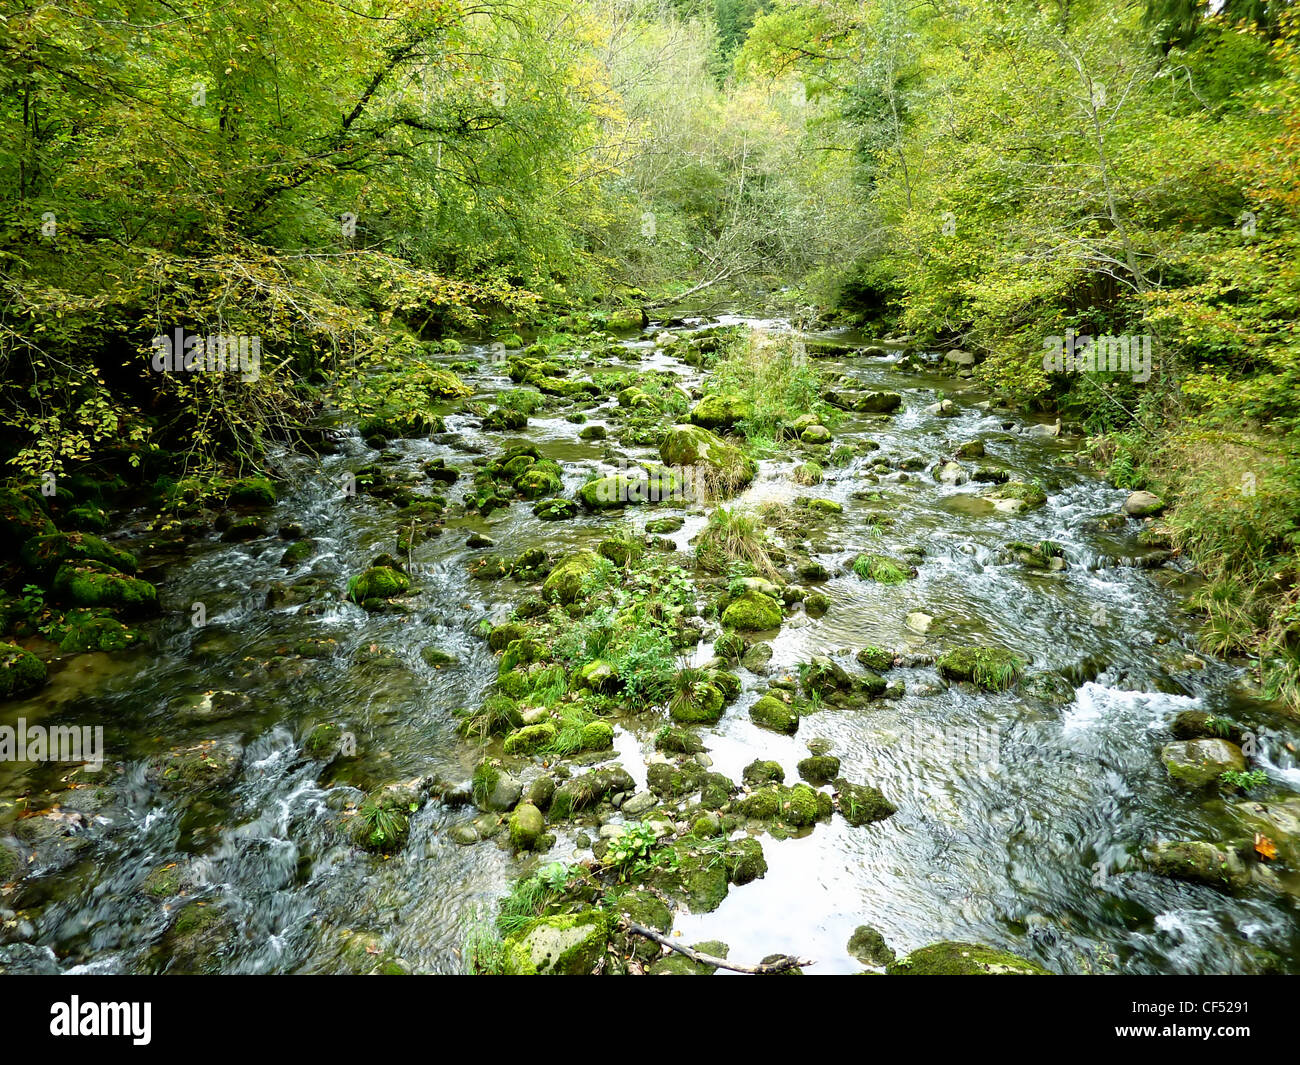 River with stones in a forest surrounded by deep green vegetation Stock Photo